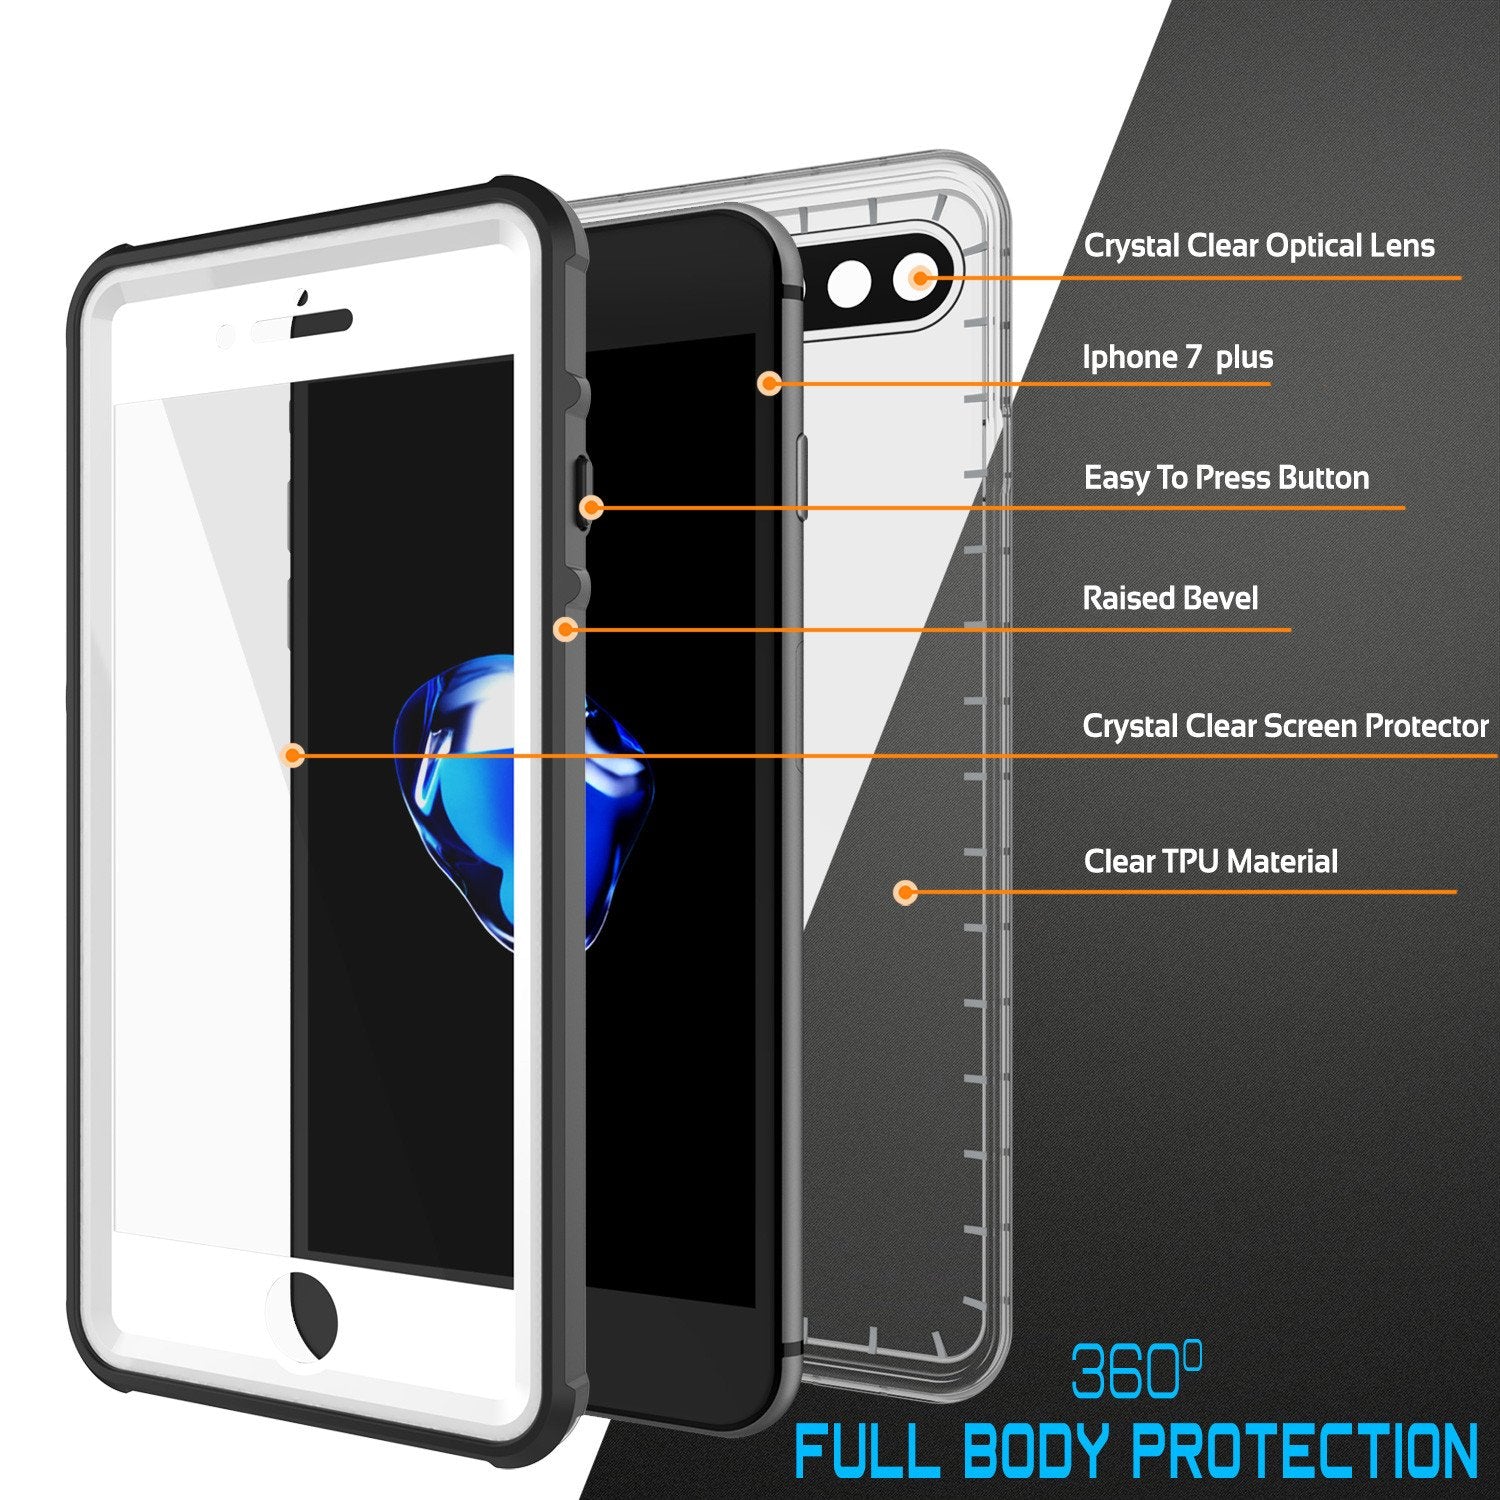 iPhone 7+ Plus Waterproof Case, PUNKcase CRYSTAL White W/ Attached Screen Protector  | Warranty - PunkCase NZ